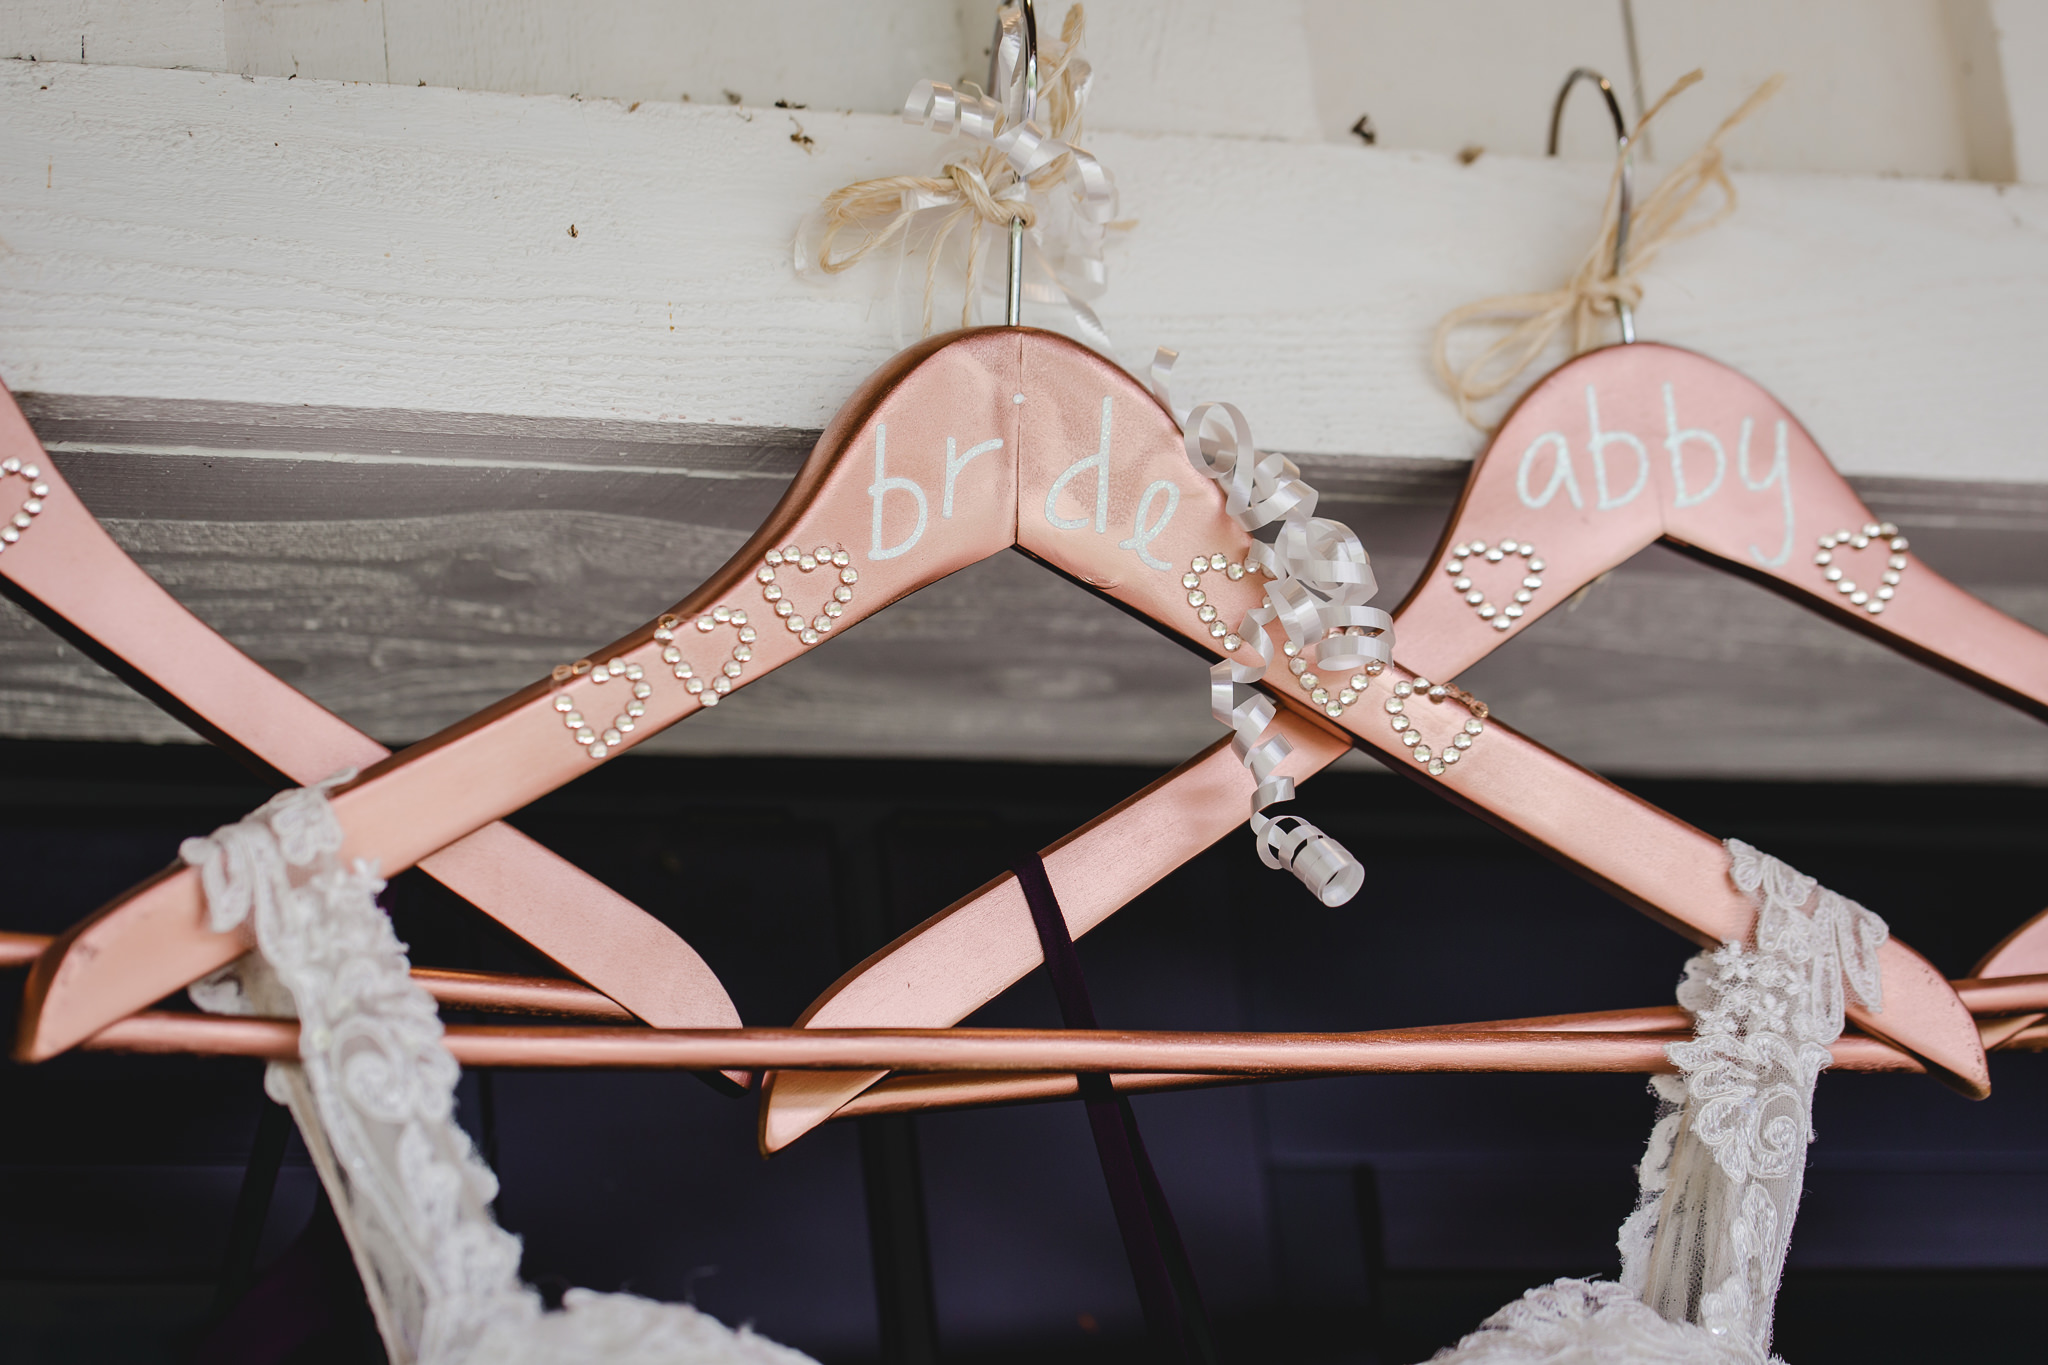 Hand-painted wooden hangers for the bride's dress